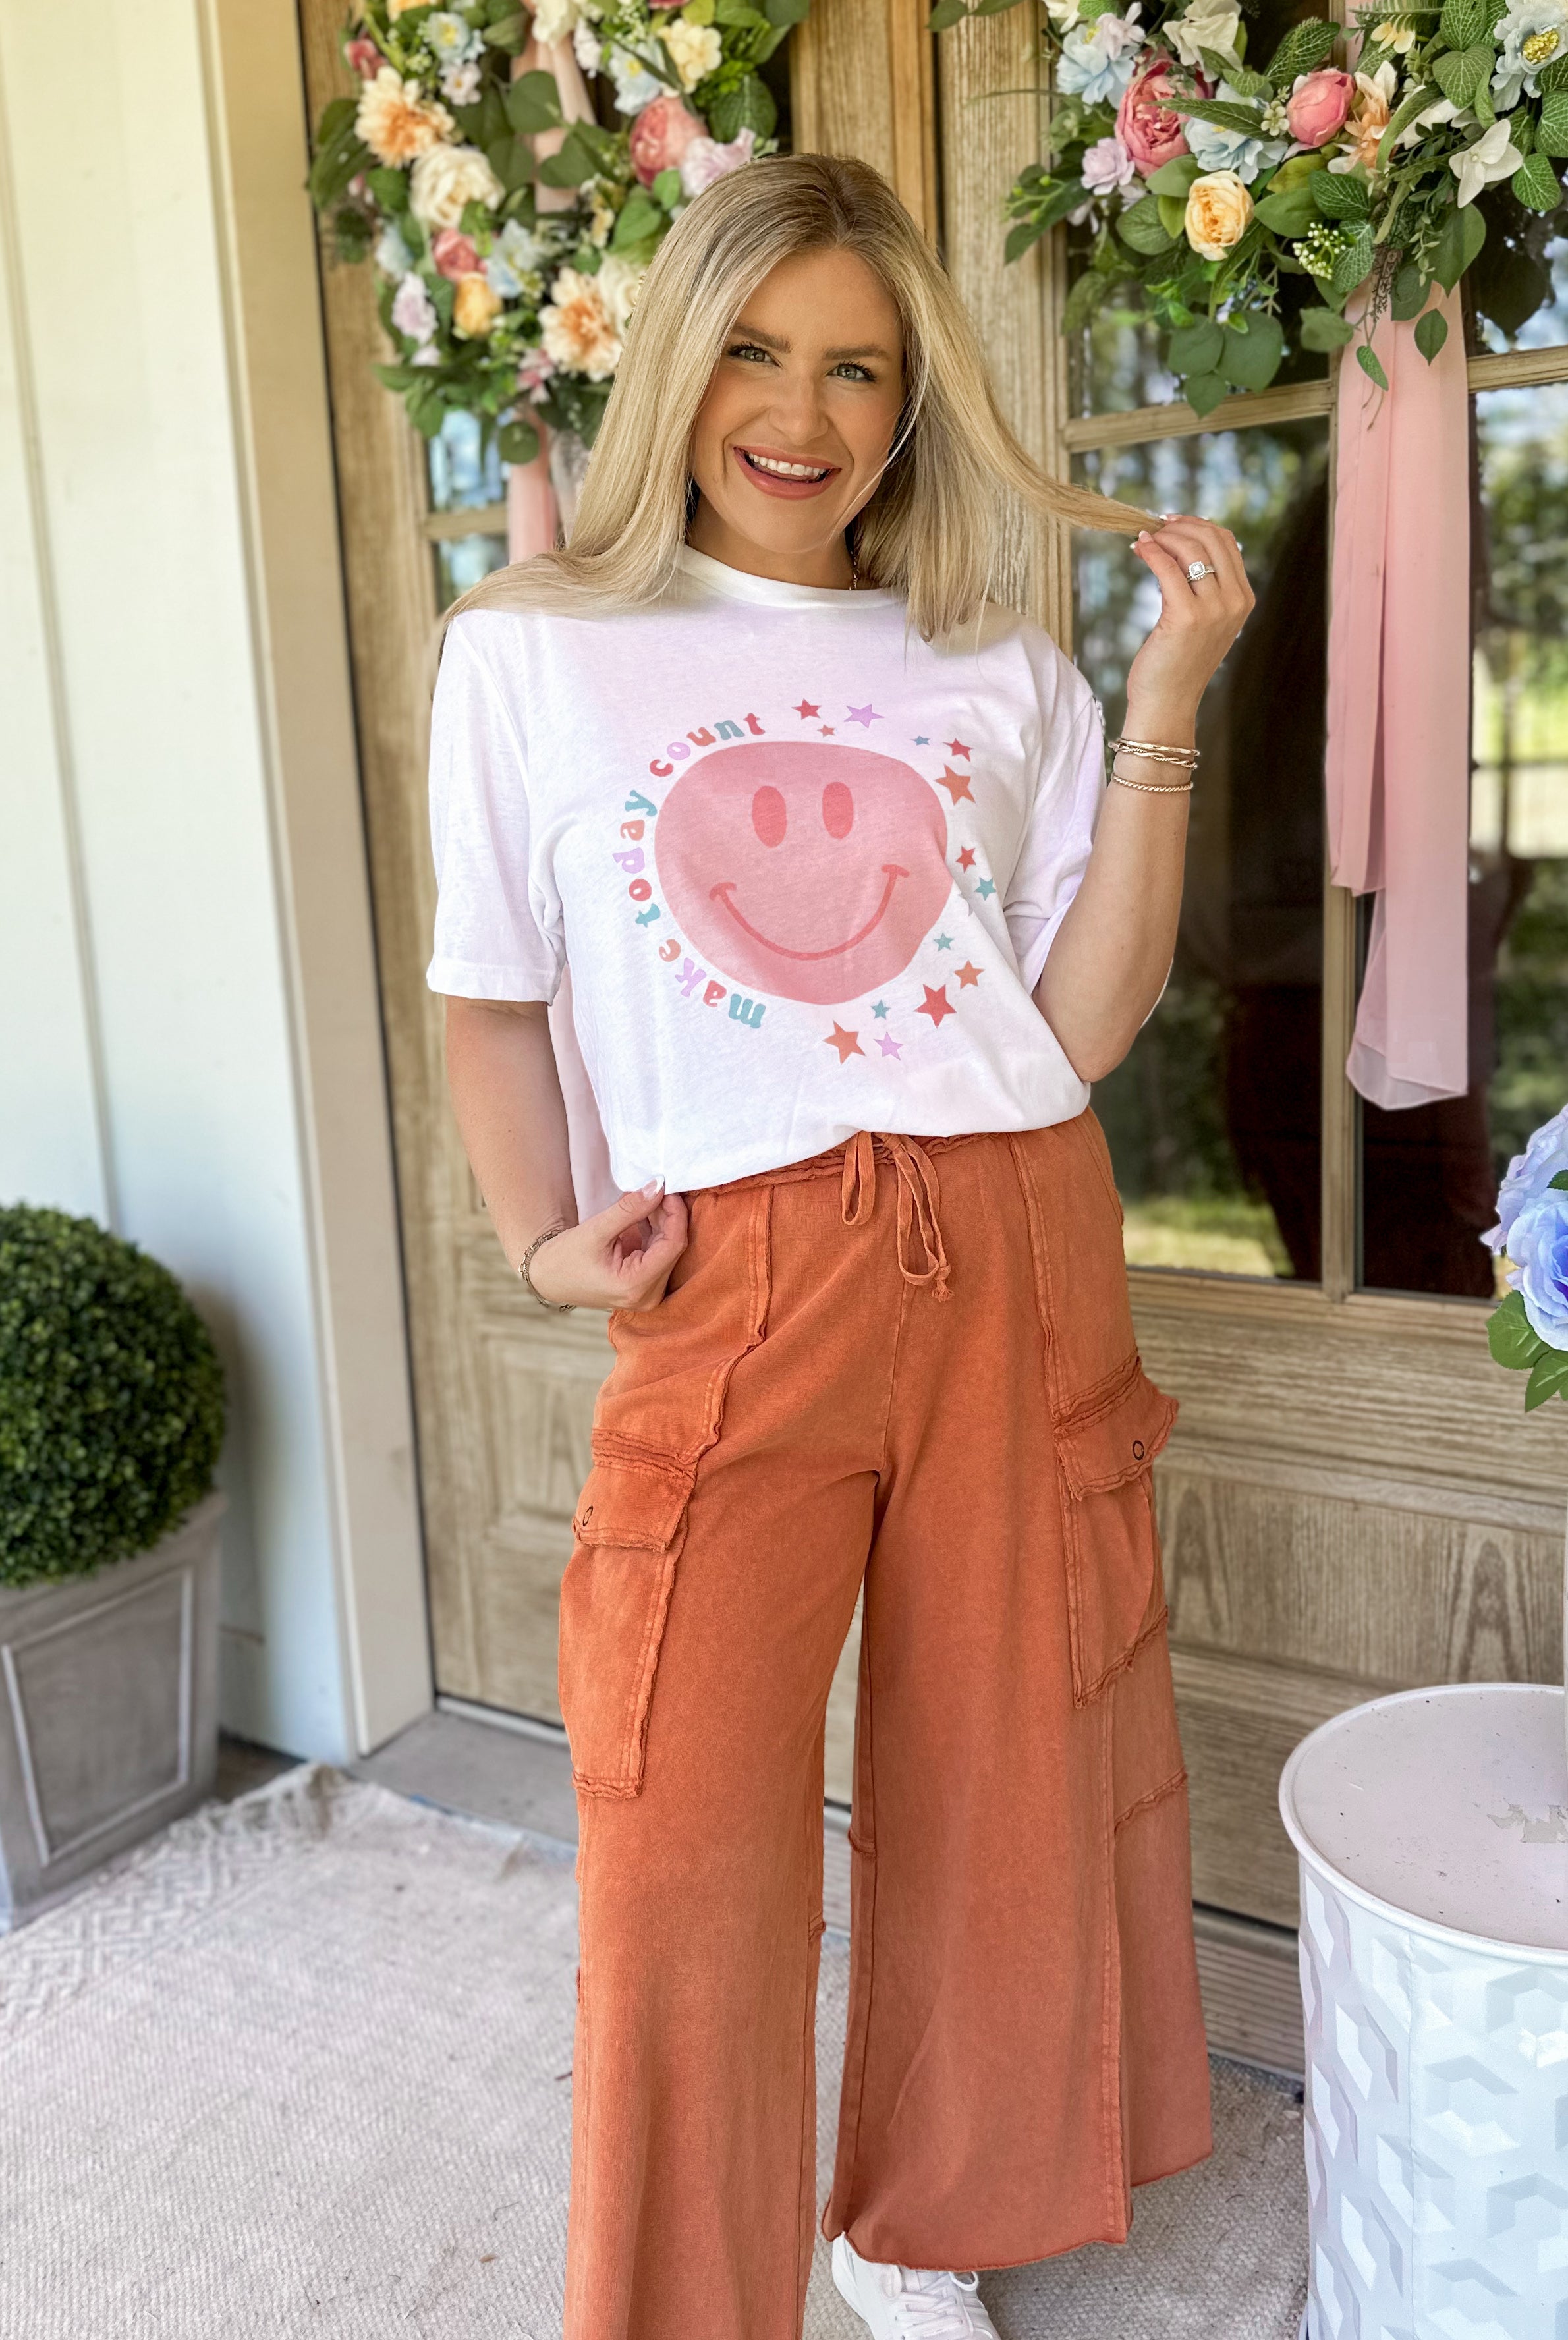 Make Today Count Short Sleeve Graphic Tee - Be You Boutique